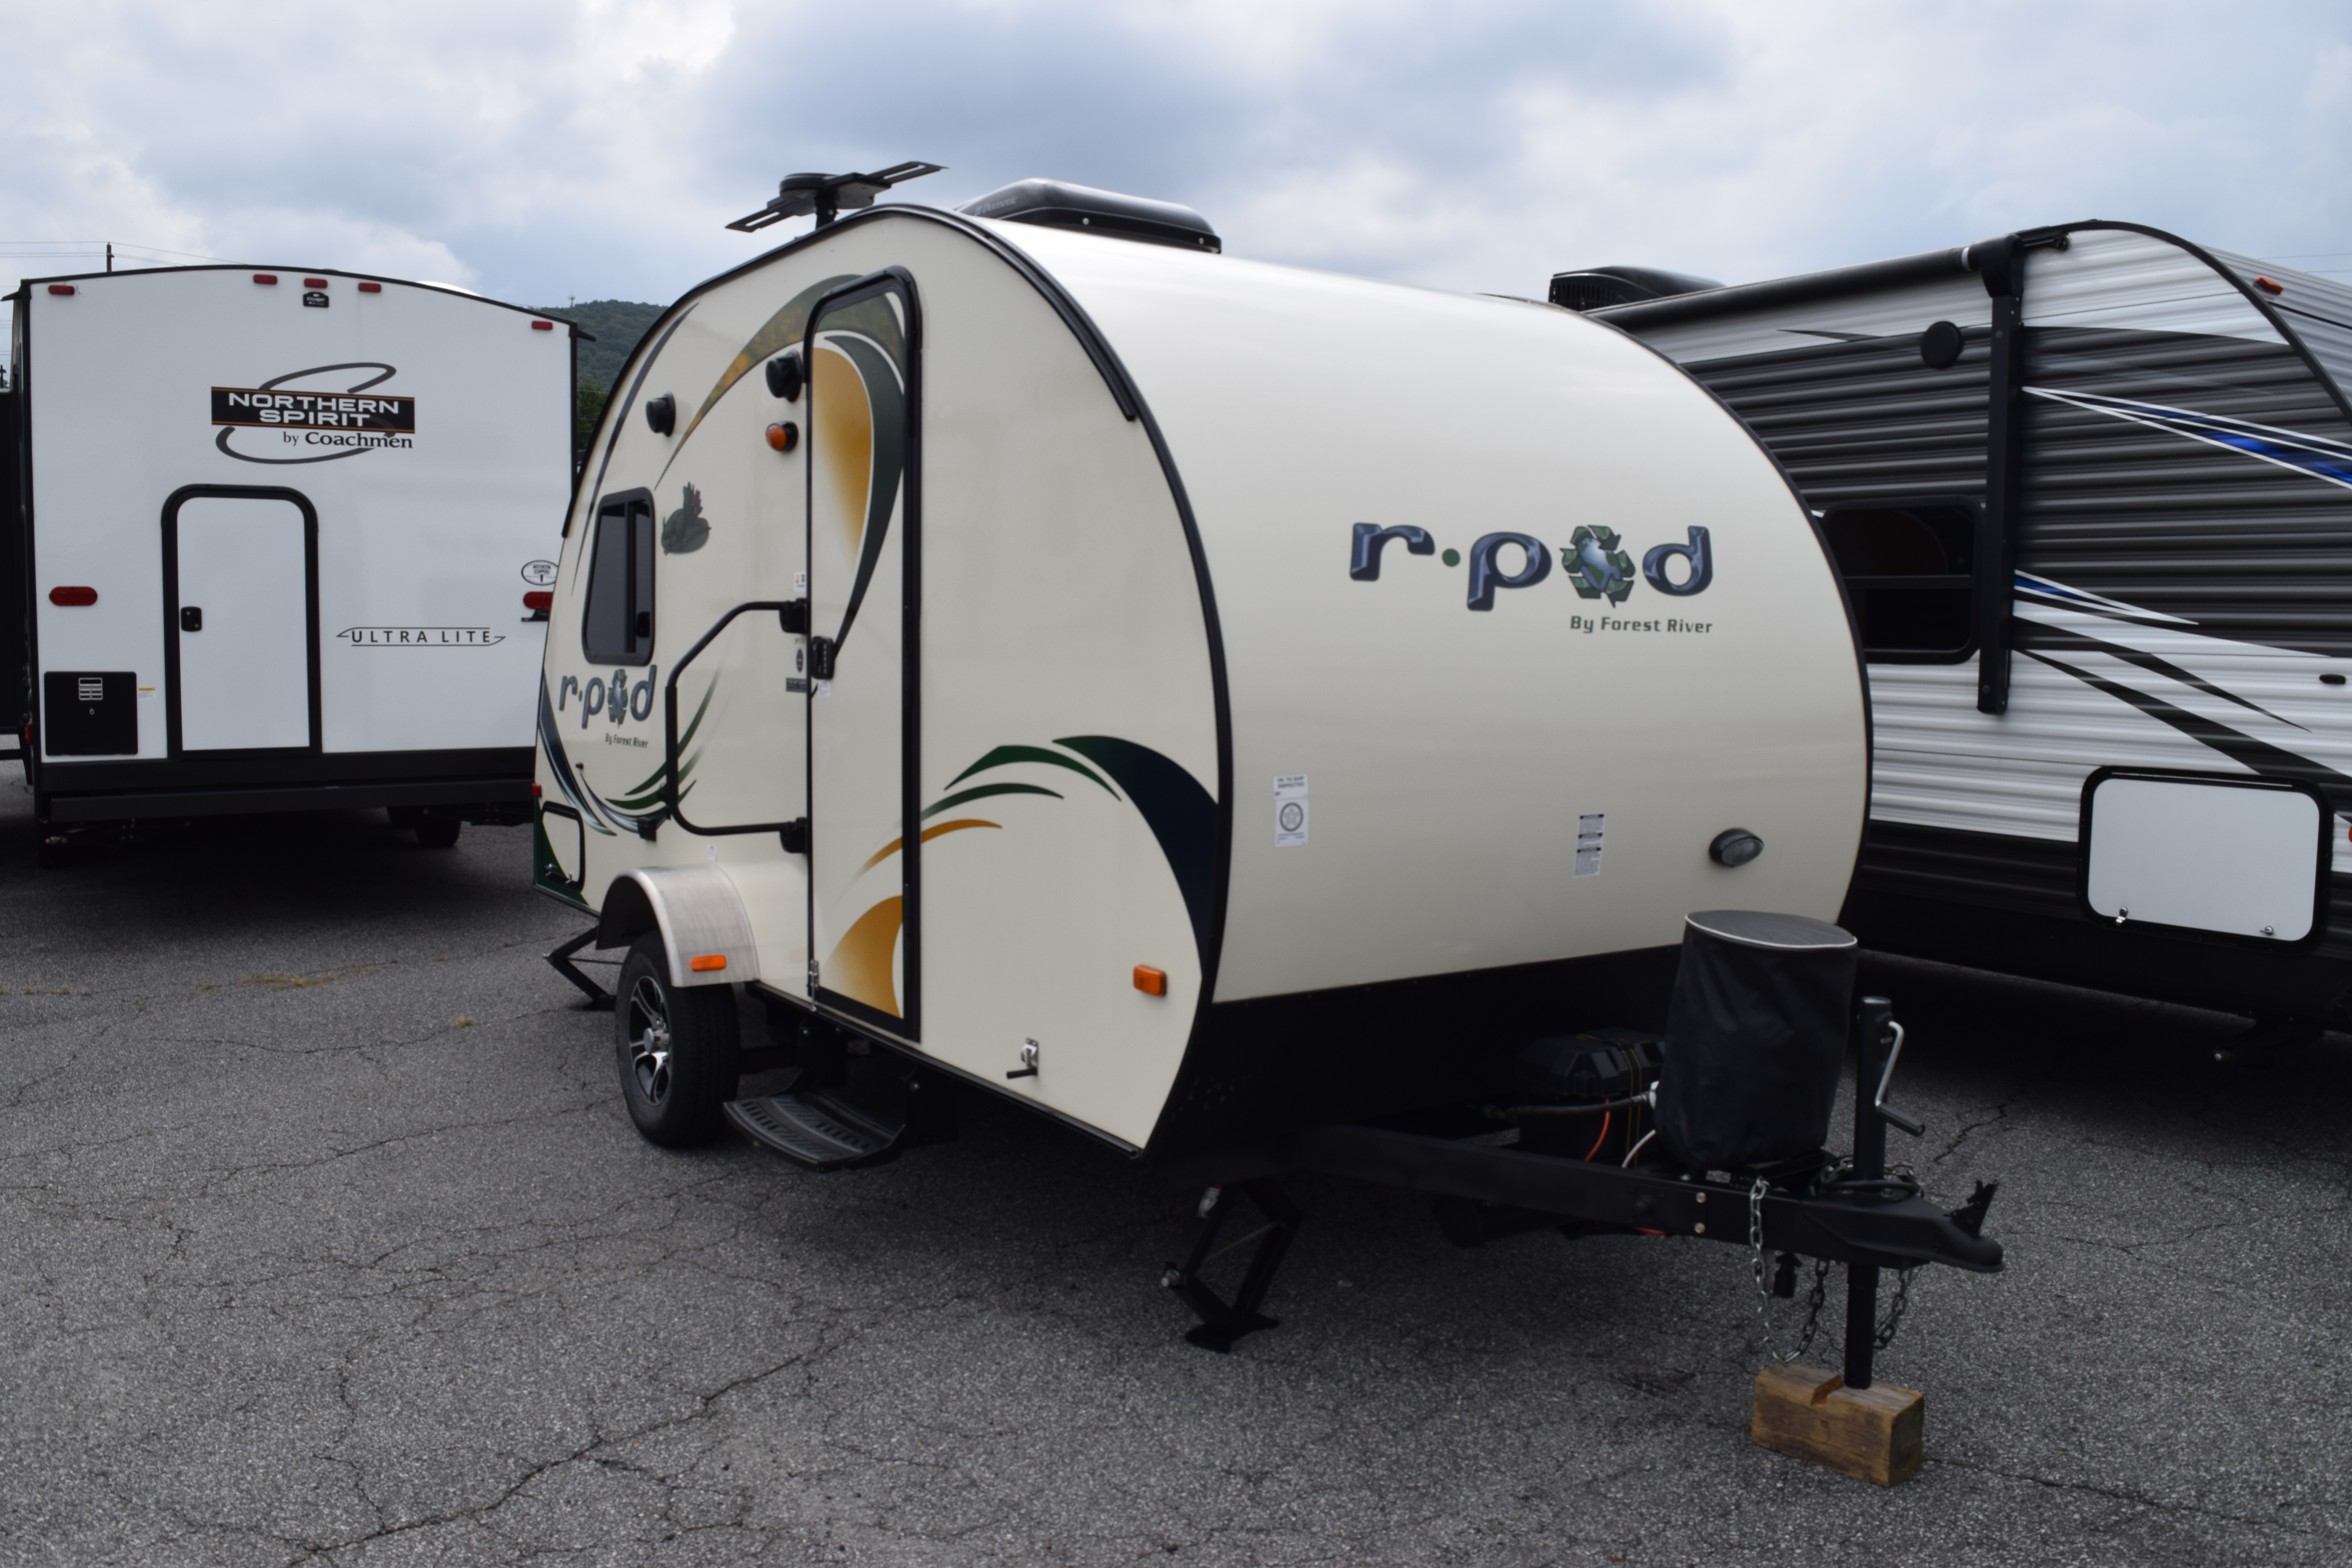 USED 2014 Forest River RPOD RP-176